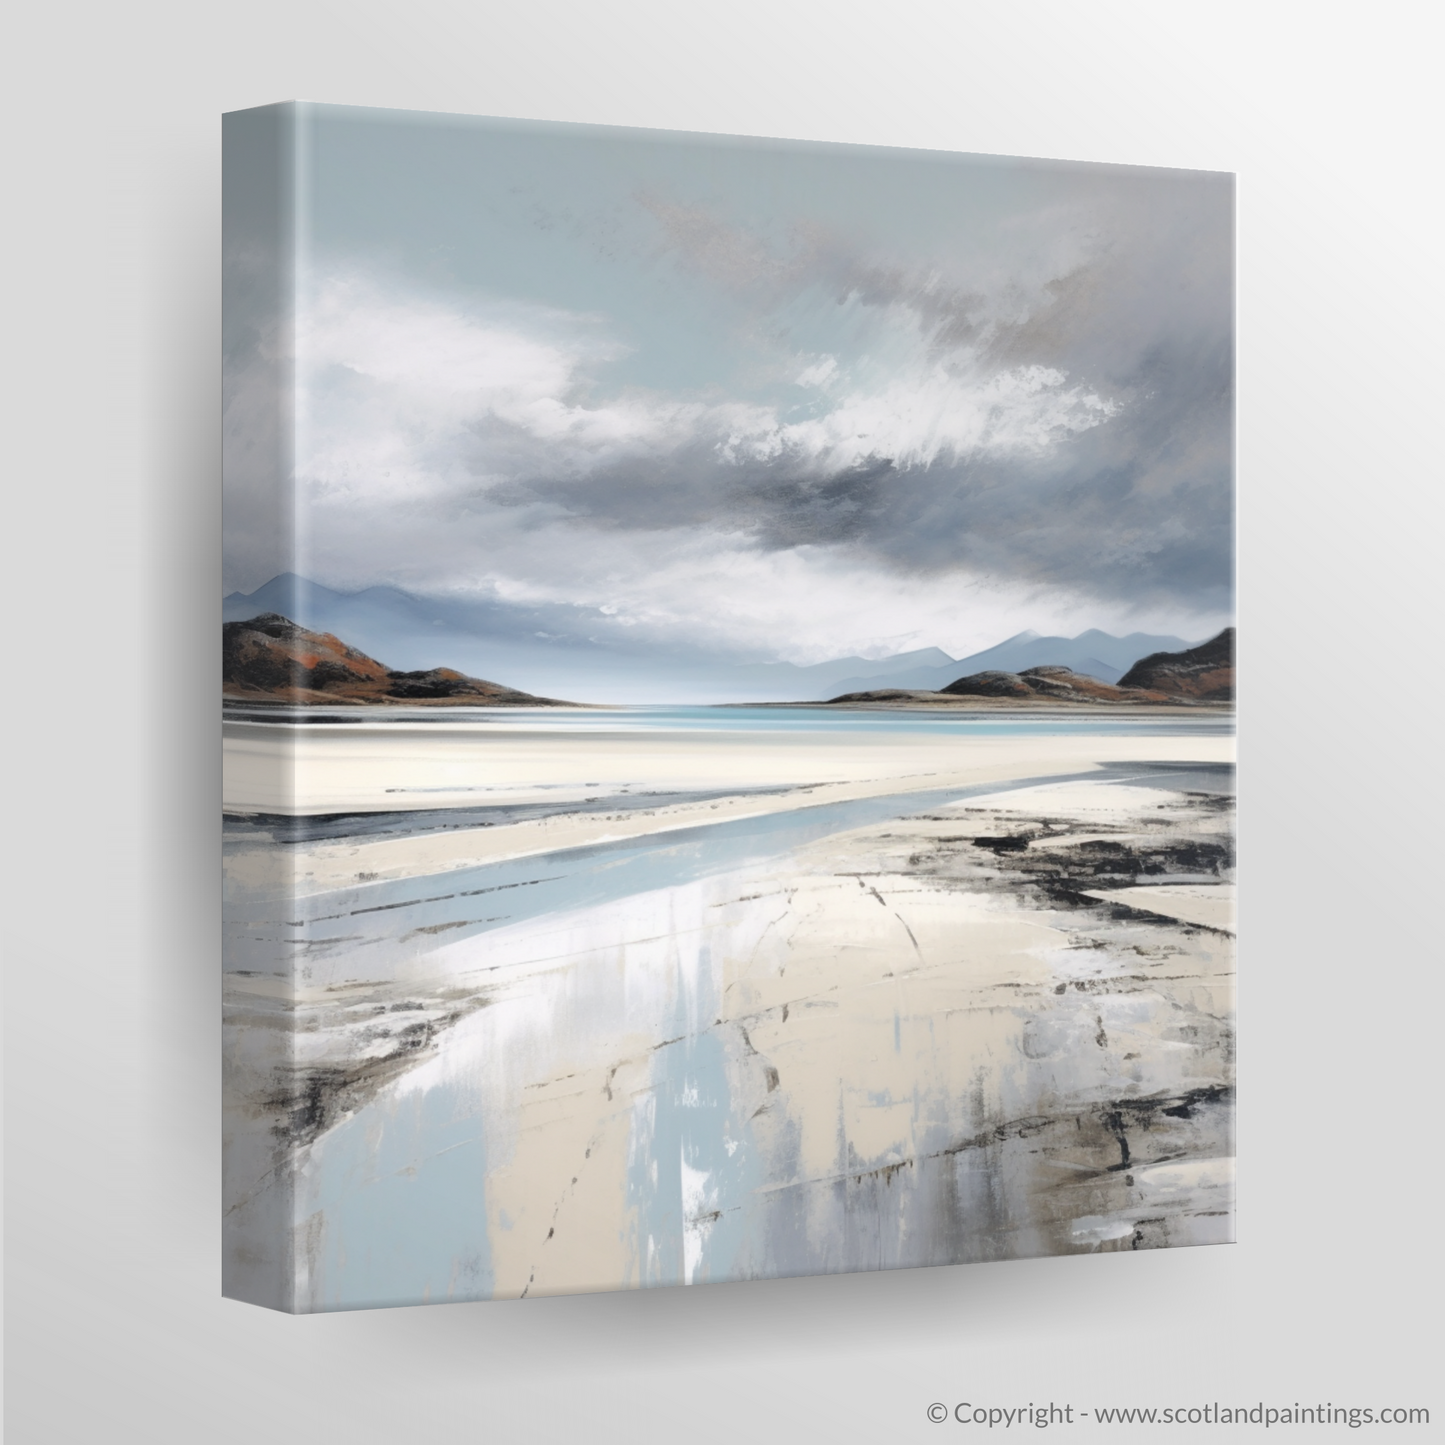 Storm over Silver Sands of Morar: A Minimalist Tribute to the Scottish Coast